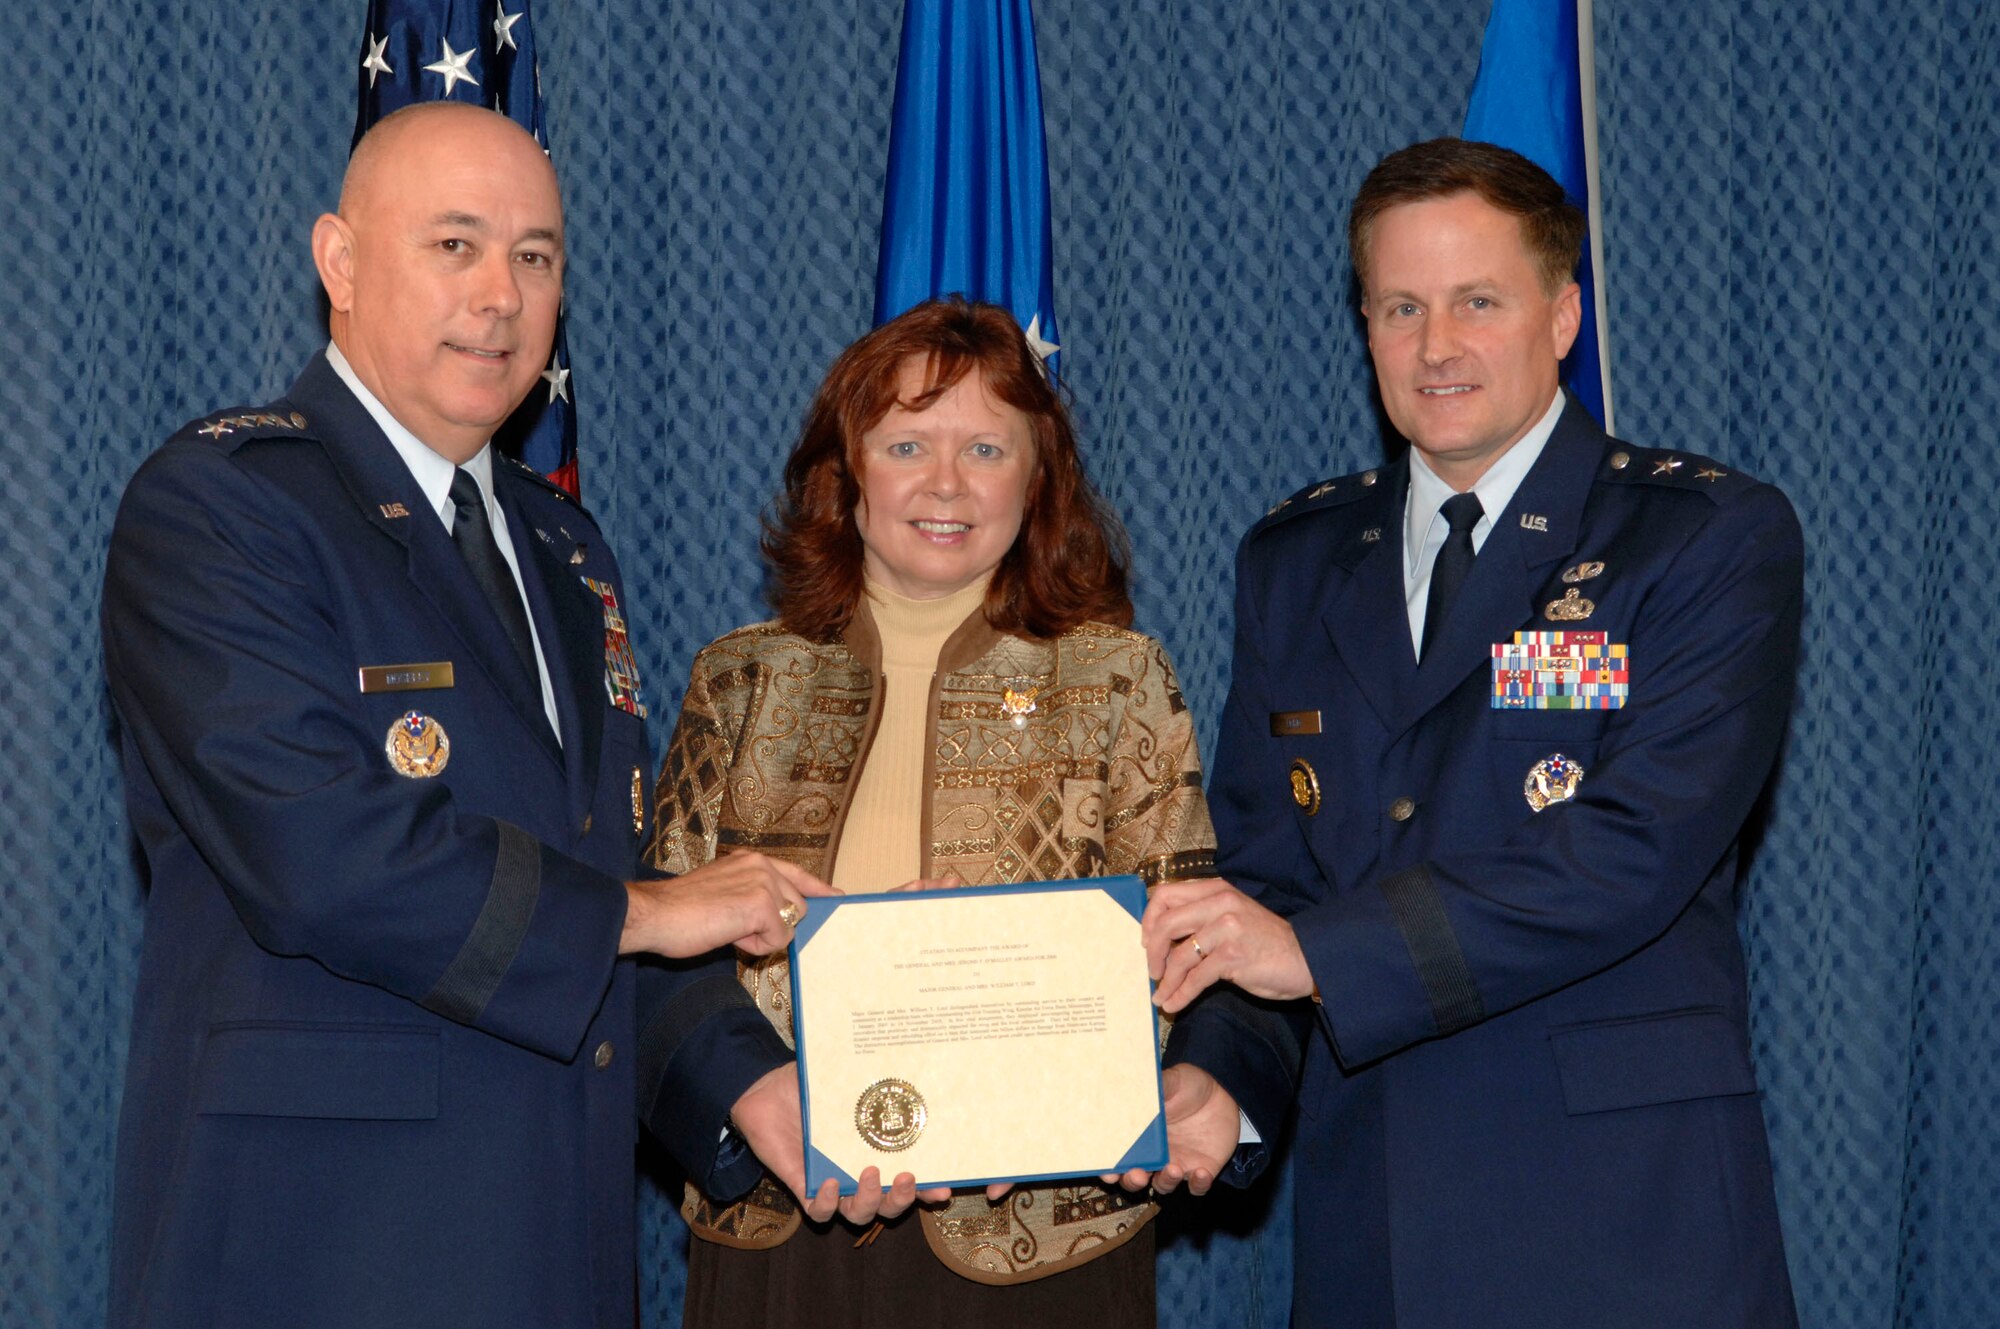 Maj. Gen. William T. Lord and his wife, Cynthia, receive the O'Malley Award from Air Force Chief of Staff Gen. T. Michael Moseley Nov. 15 at the Pentagon. The award is given to the wing commander and spouse who were the most involved in their community. General Lord was the base commander of Keesler Air Force Base, Miss., where he dealt with four hurricanes to include Katrina and Rita that devasted the Gulf Coast. (U.S. Air Force photo/Tech. Sgt. Cohen Young)